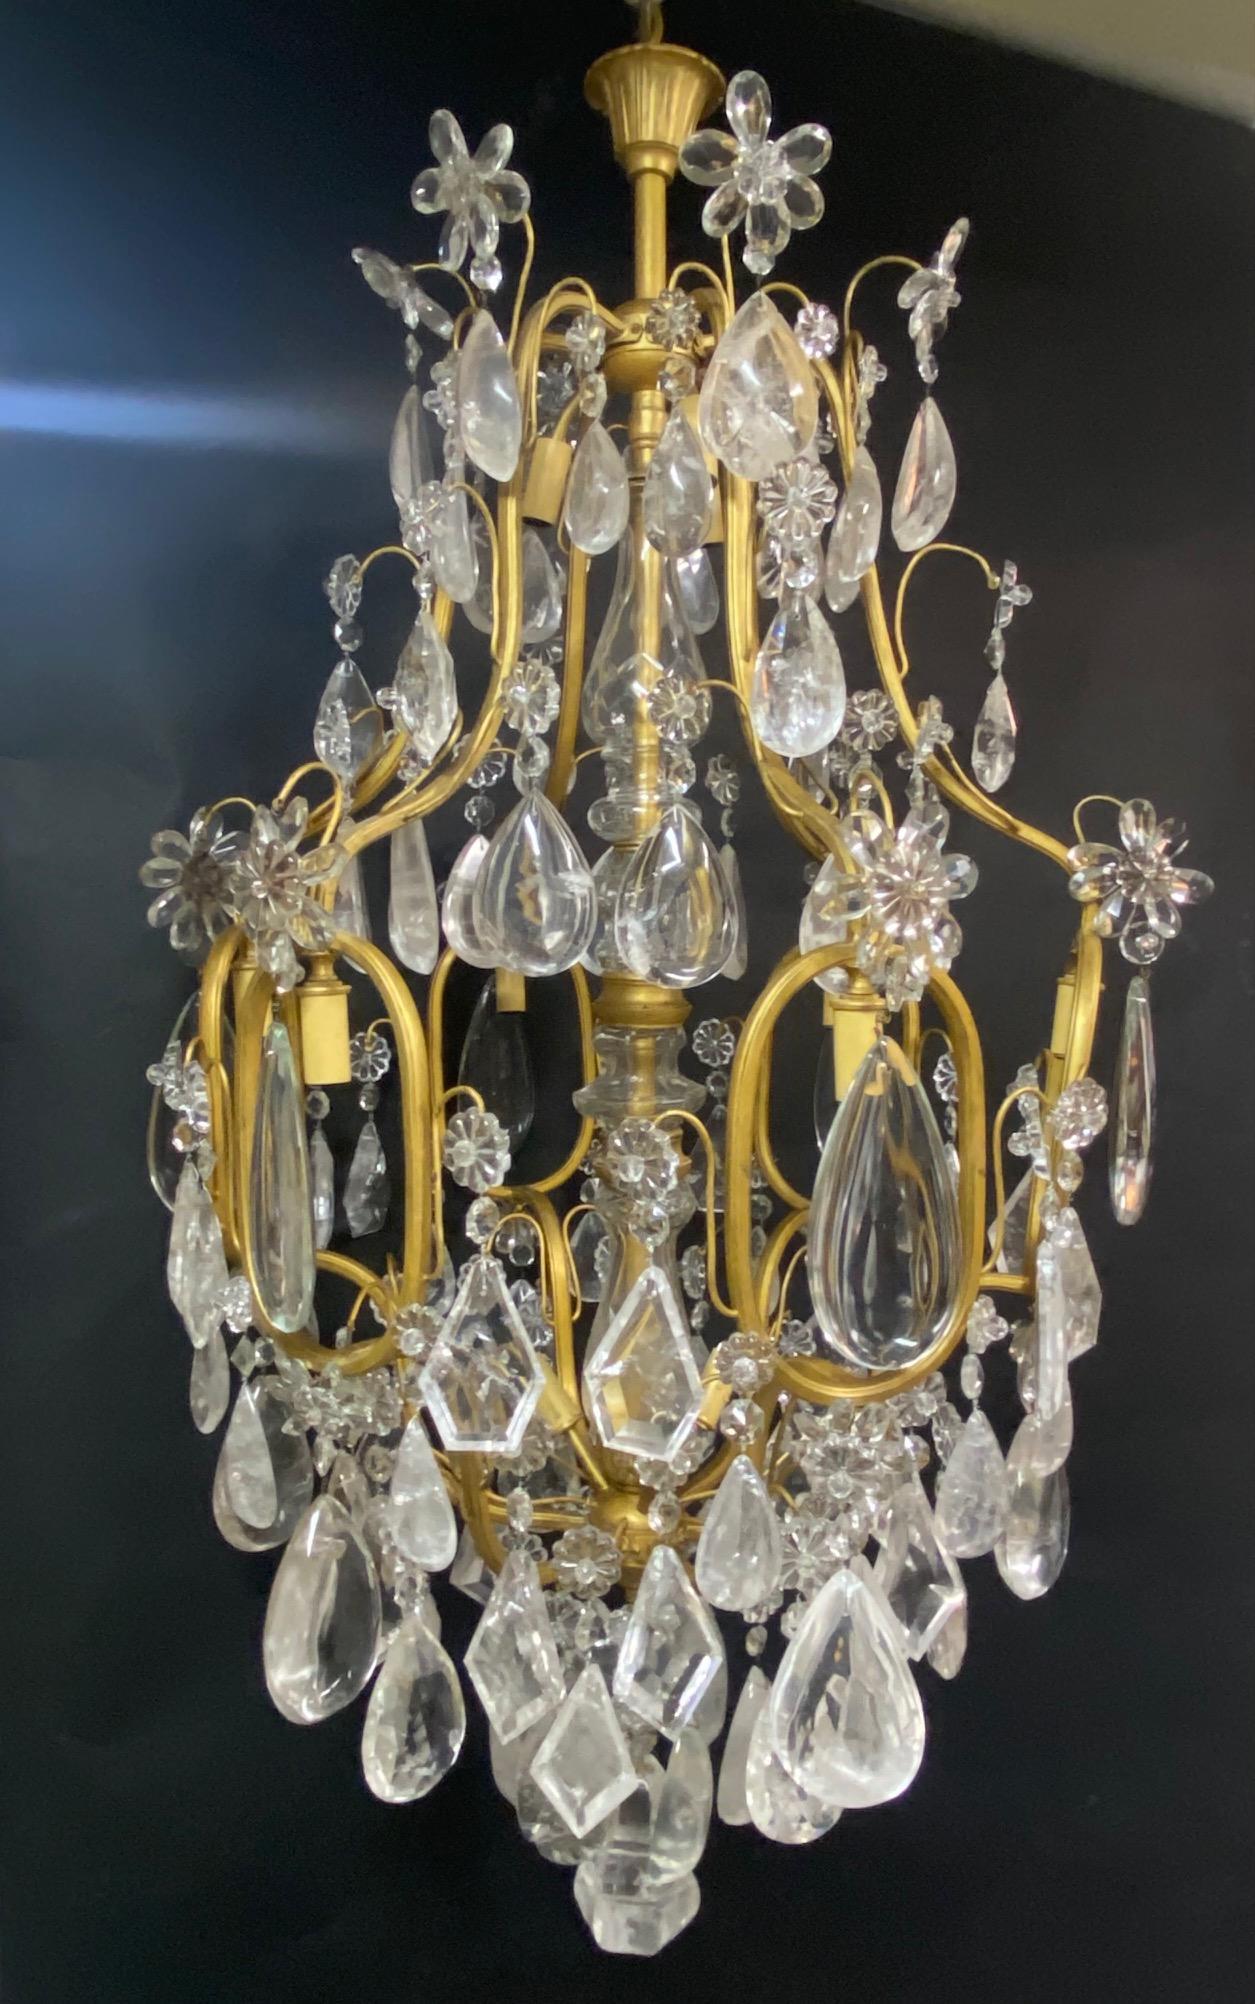 Late 19th century French chandelier.
Made with bronze and rock crystal.